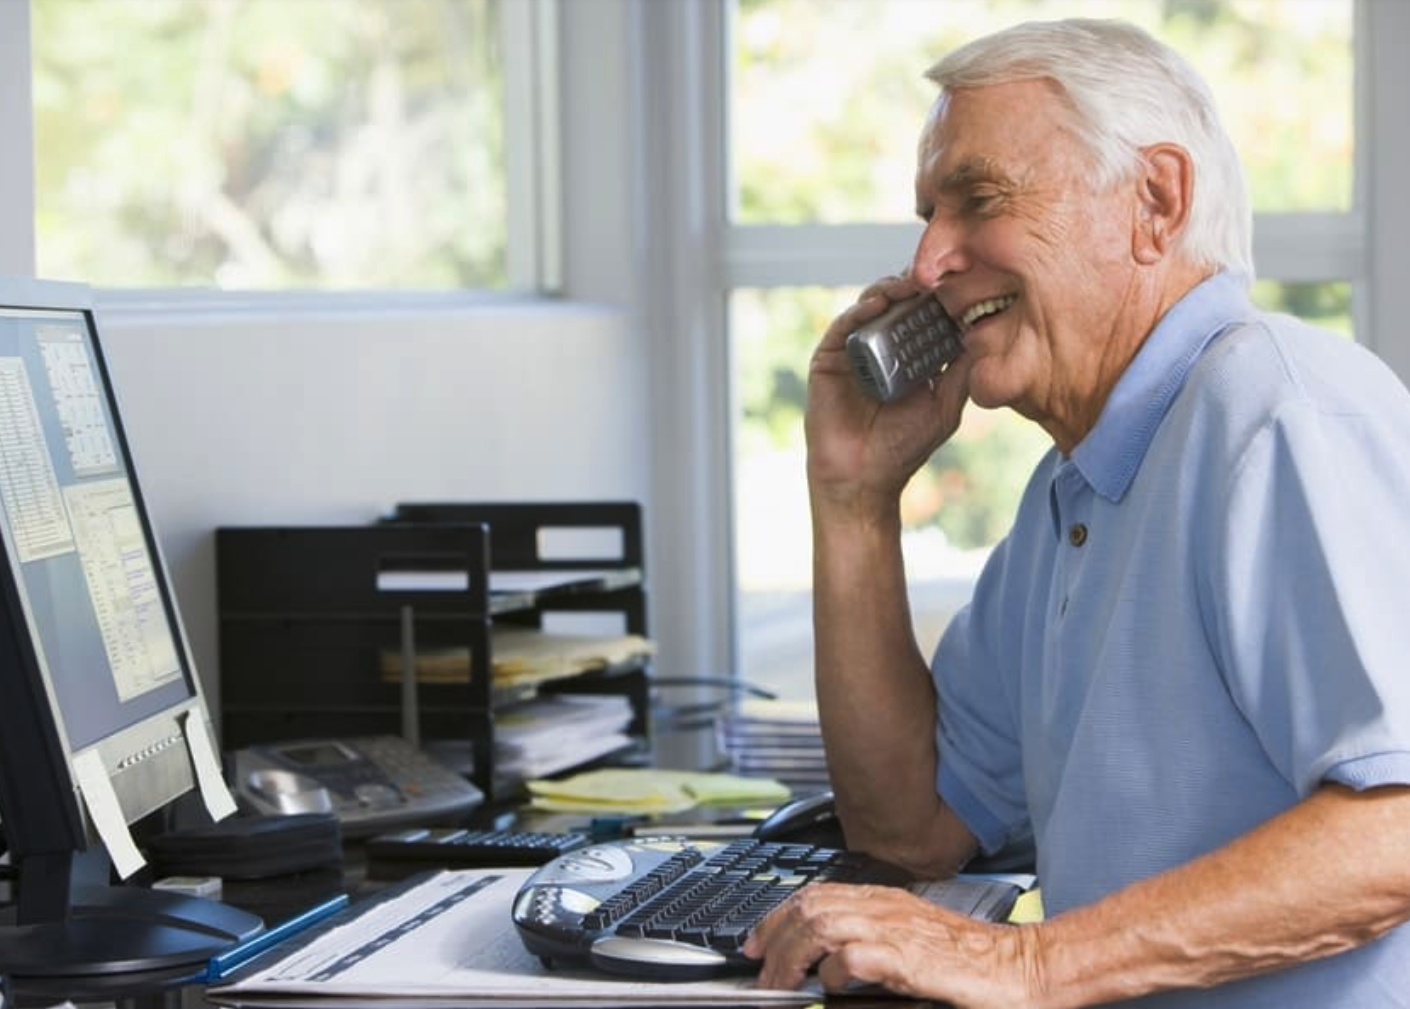 A senior citizen sits at a desk and smiles while on a phone call.